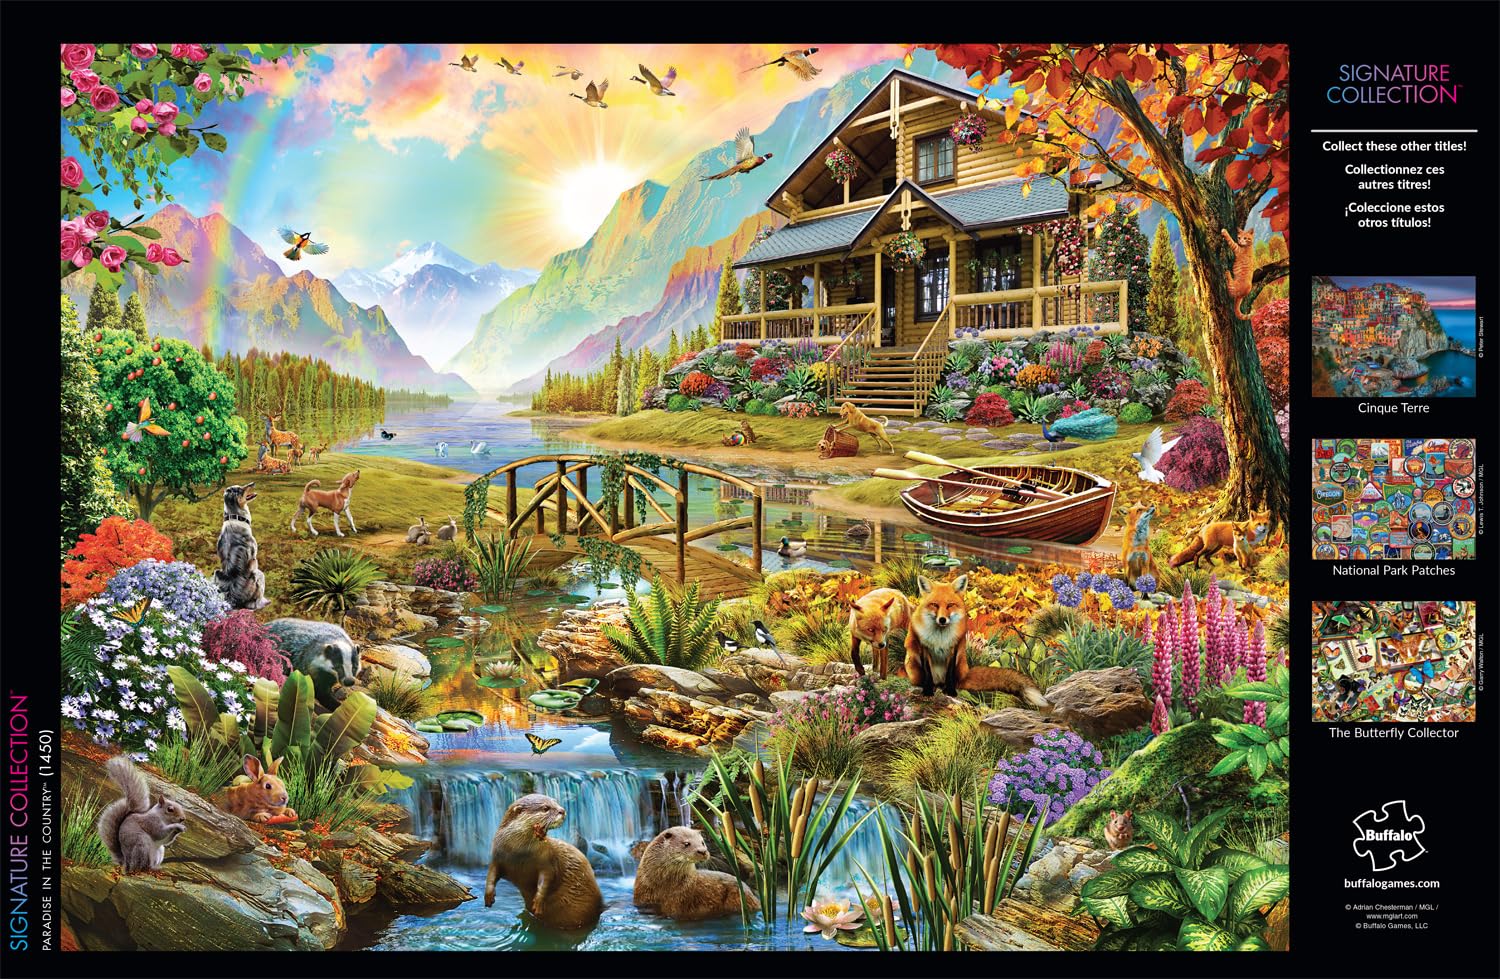 Buffalo Games - Paradise in The Country - 1000 Piece Jigsaw Puzzle for Adults Challenging Puzzle Perfect for Game Nights - Finished Size 26.75 x 19.75